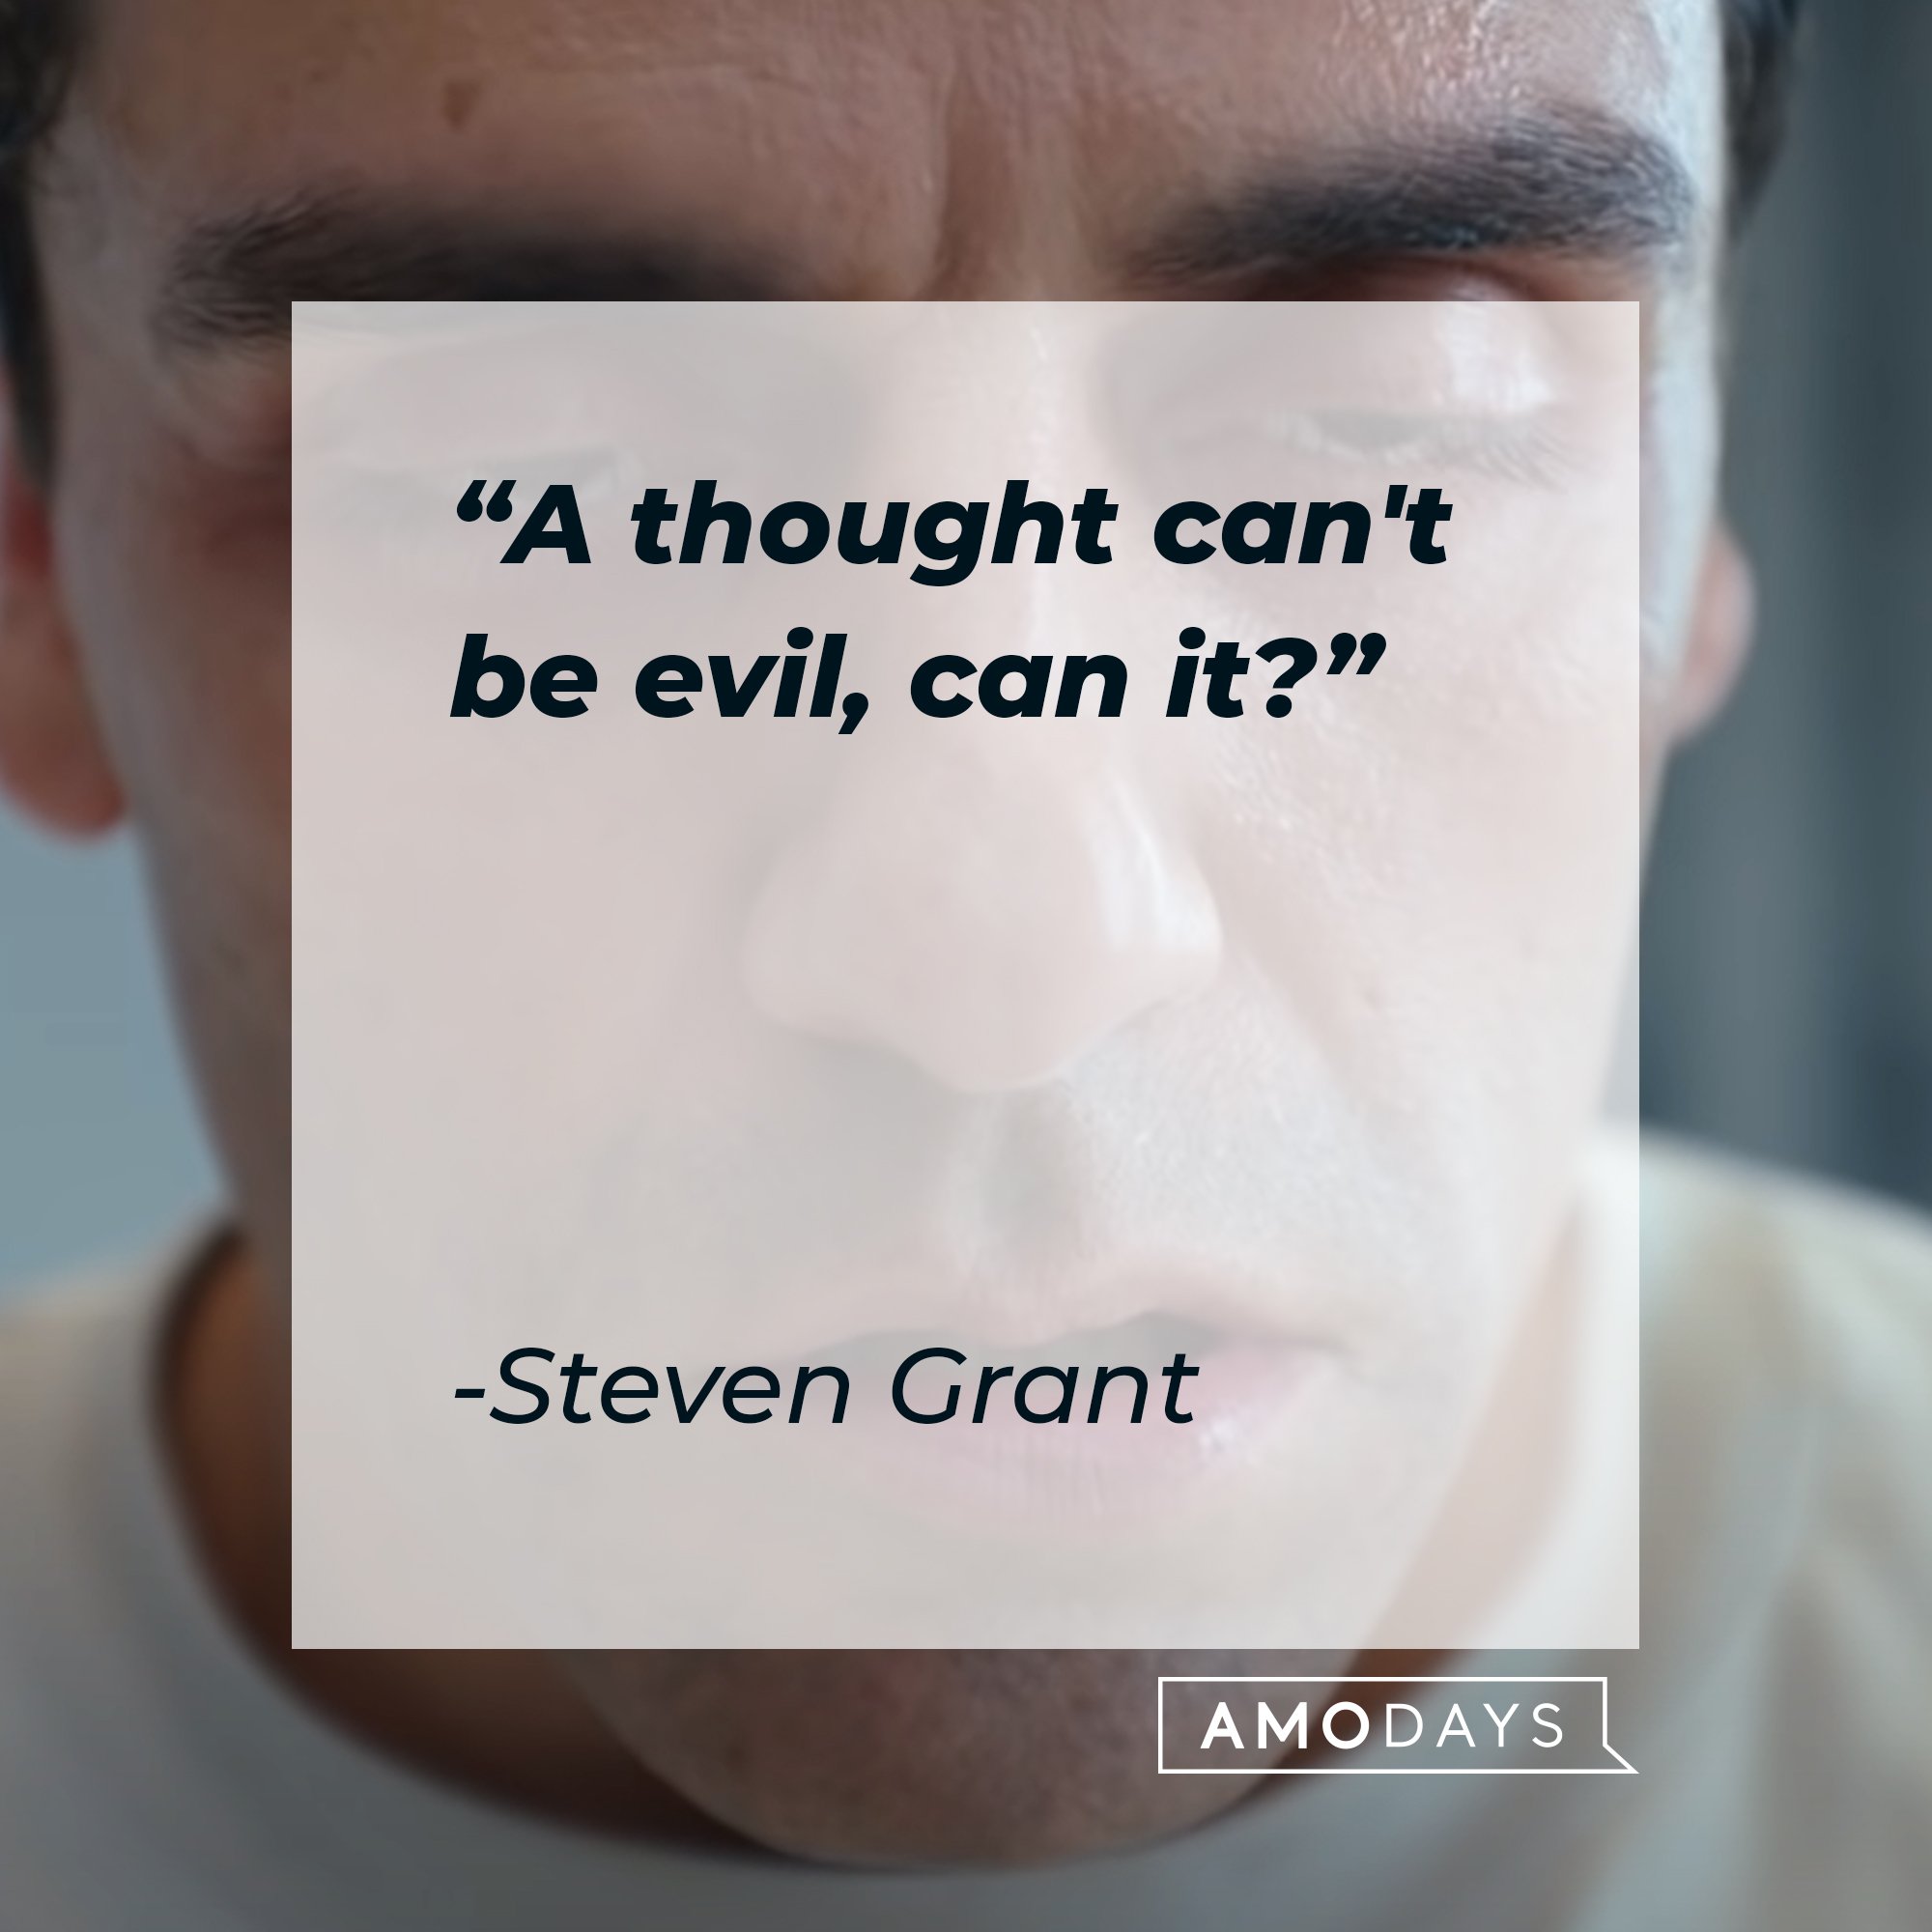  Steven Grant’s quote: "A thought can't be evil, can it?" | Image: AmoDays